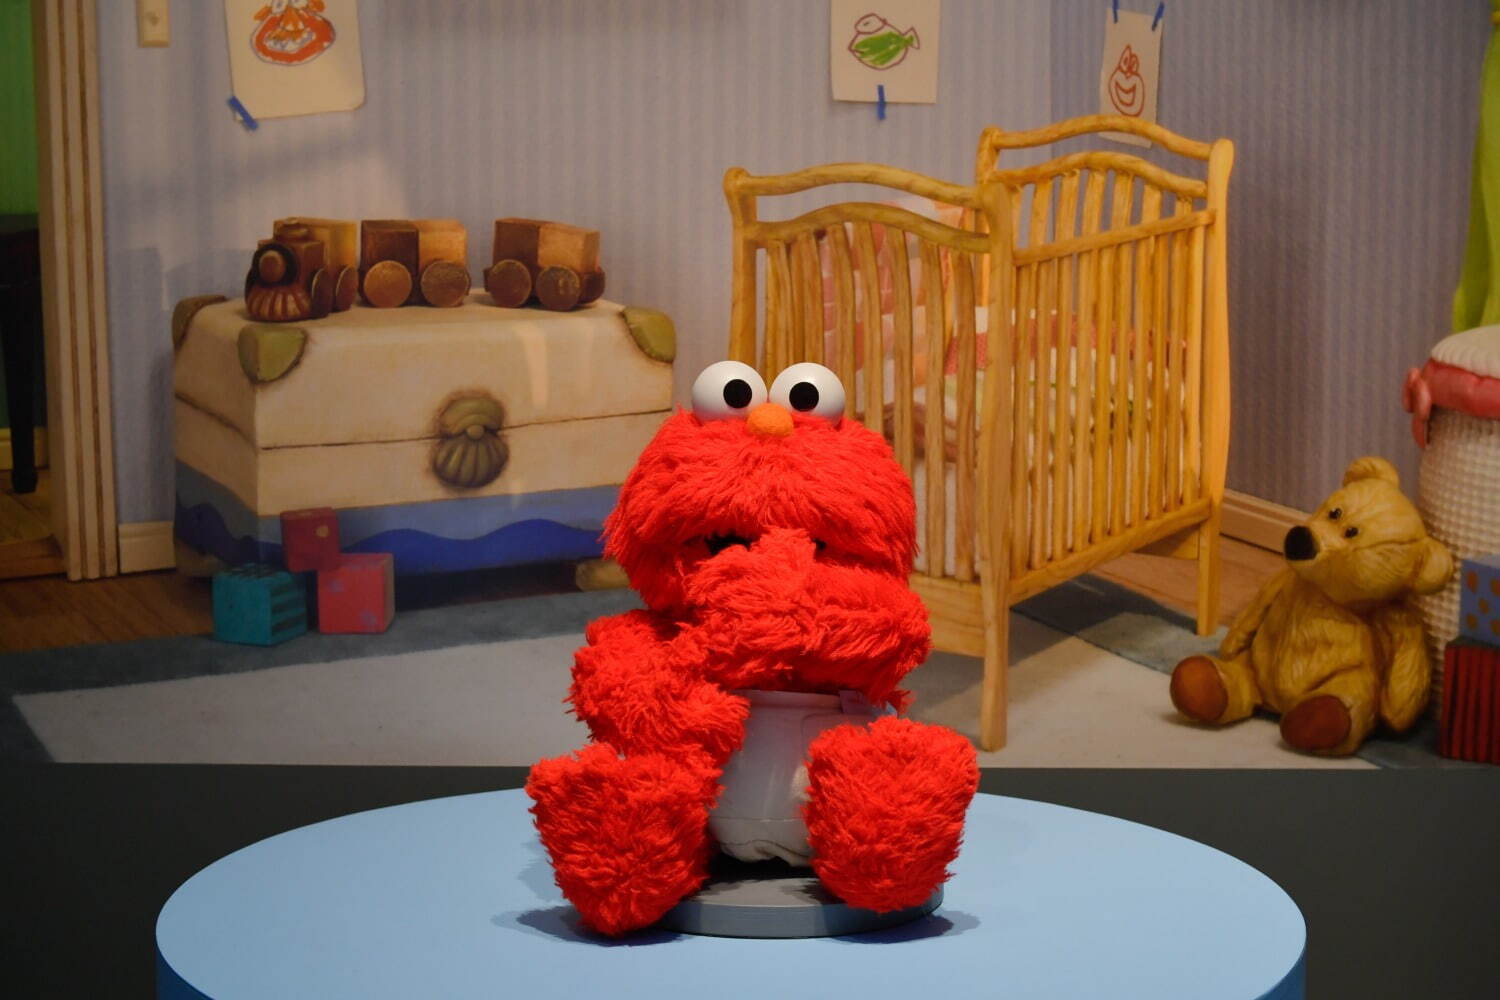 Sesame Street(R) and associated characters, trademarks and design elements are owned and licensedby Sesame Workshop. © 2024 Sesame Workshop. All rights reserved